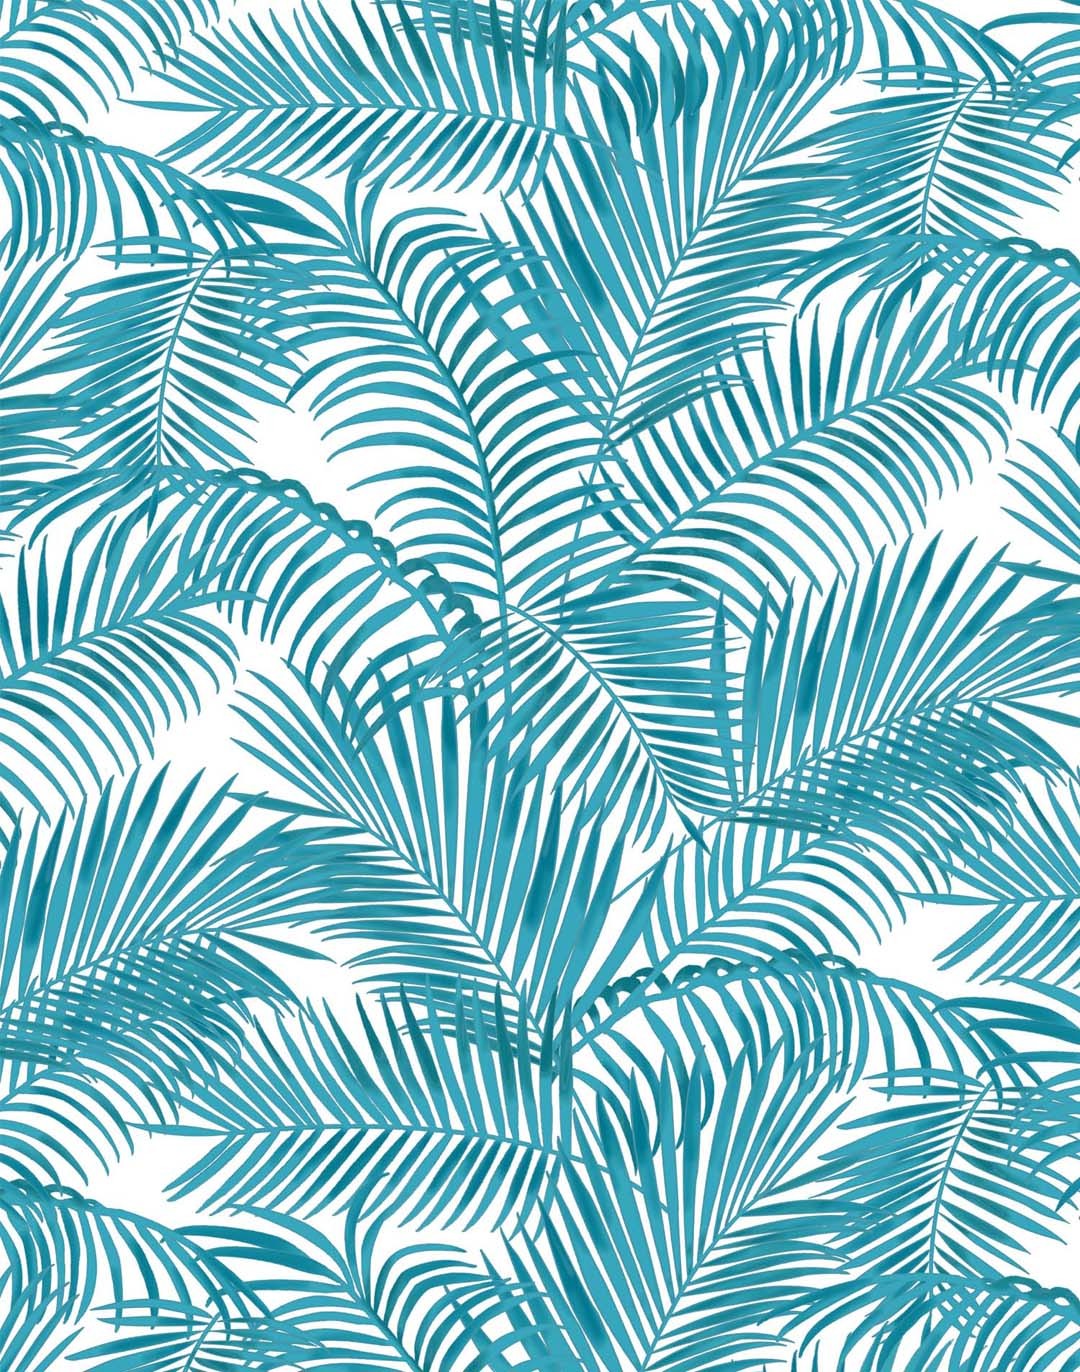 Majestic Palm wallpaper - Turquoise on White - Wallpaper